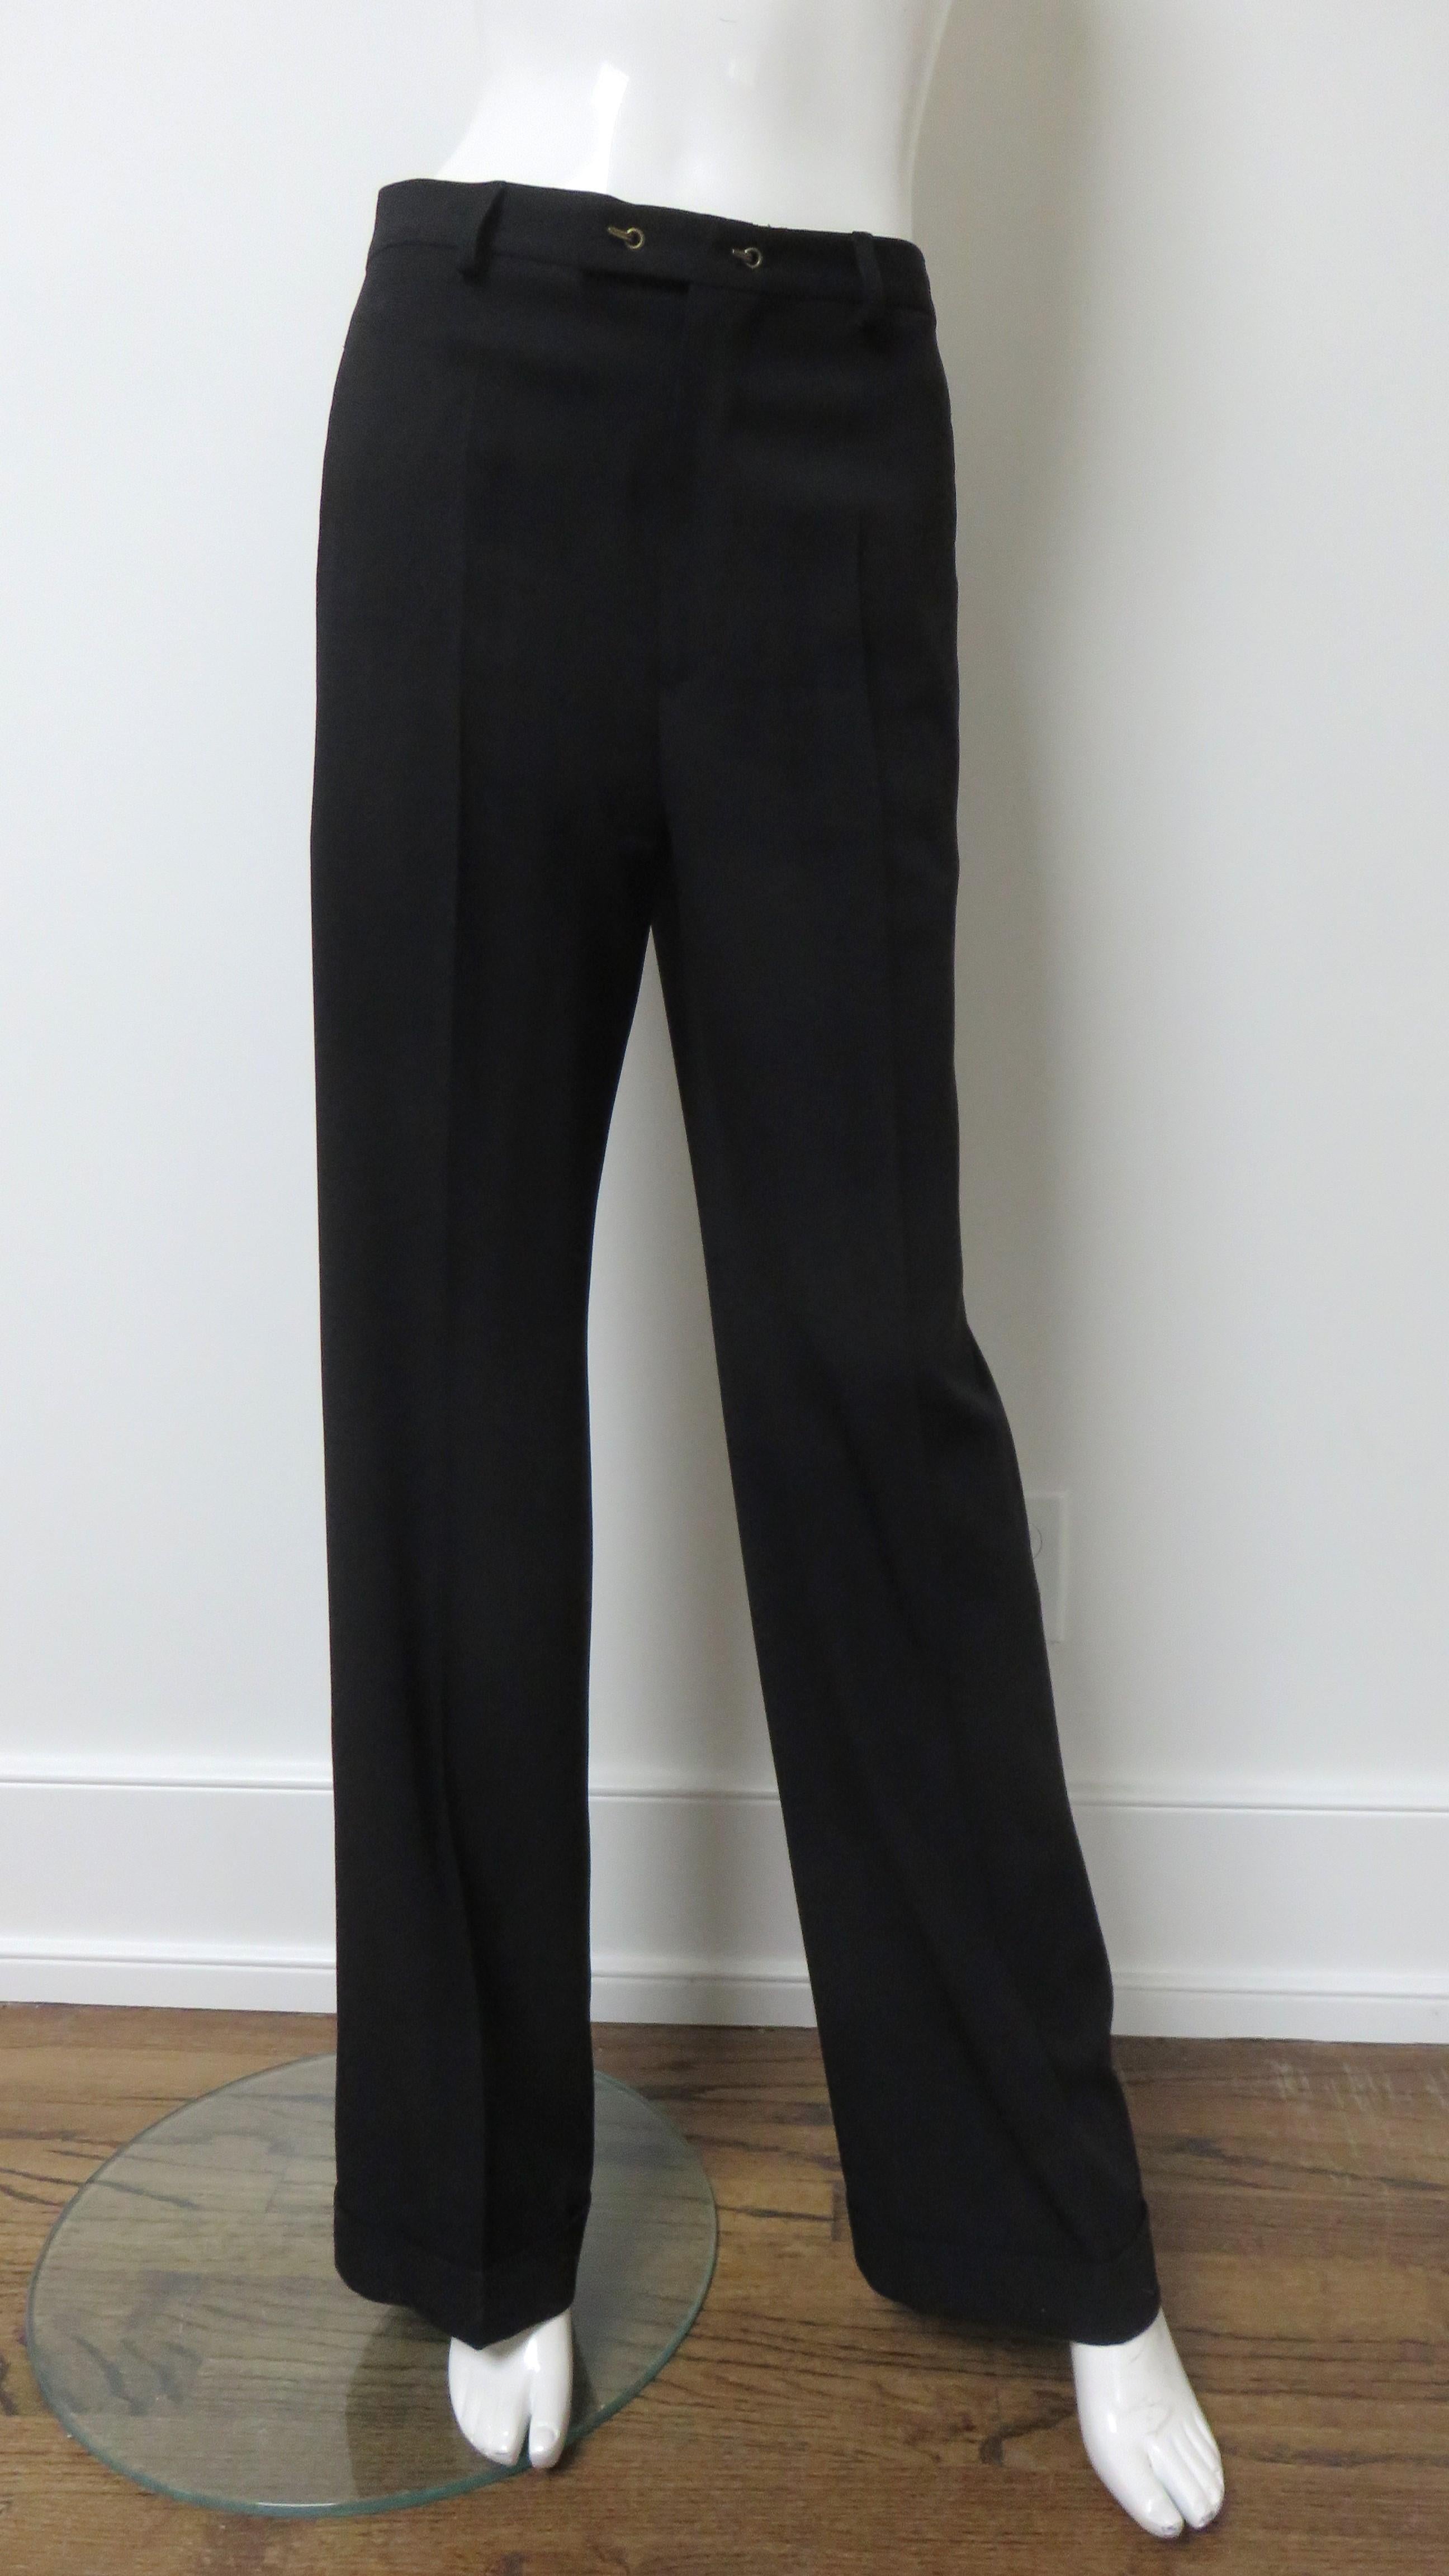 Jean Paul Gaultier Double Breasted Belted Pant Suit A/W 1999 For Sale 6